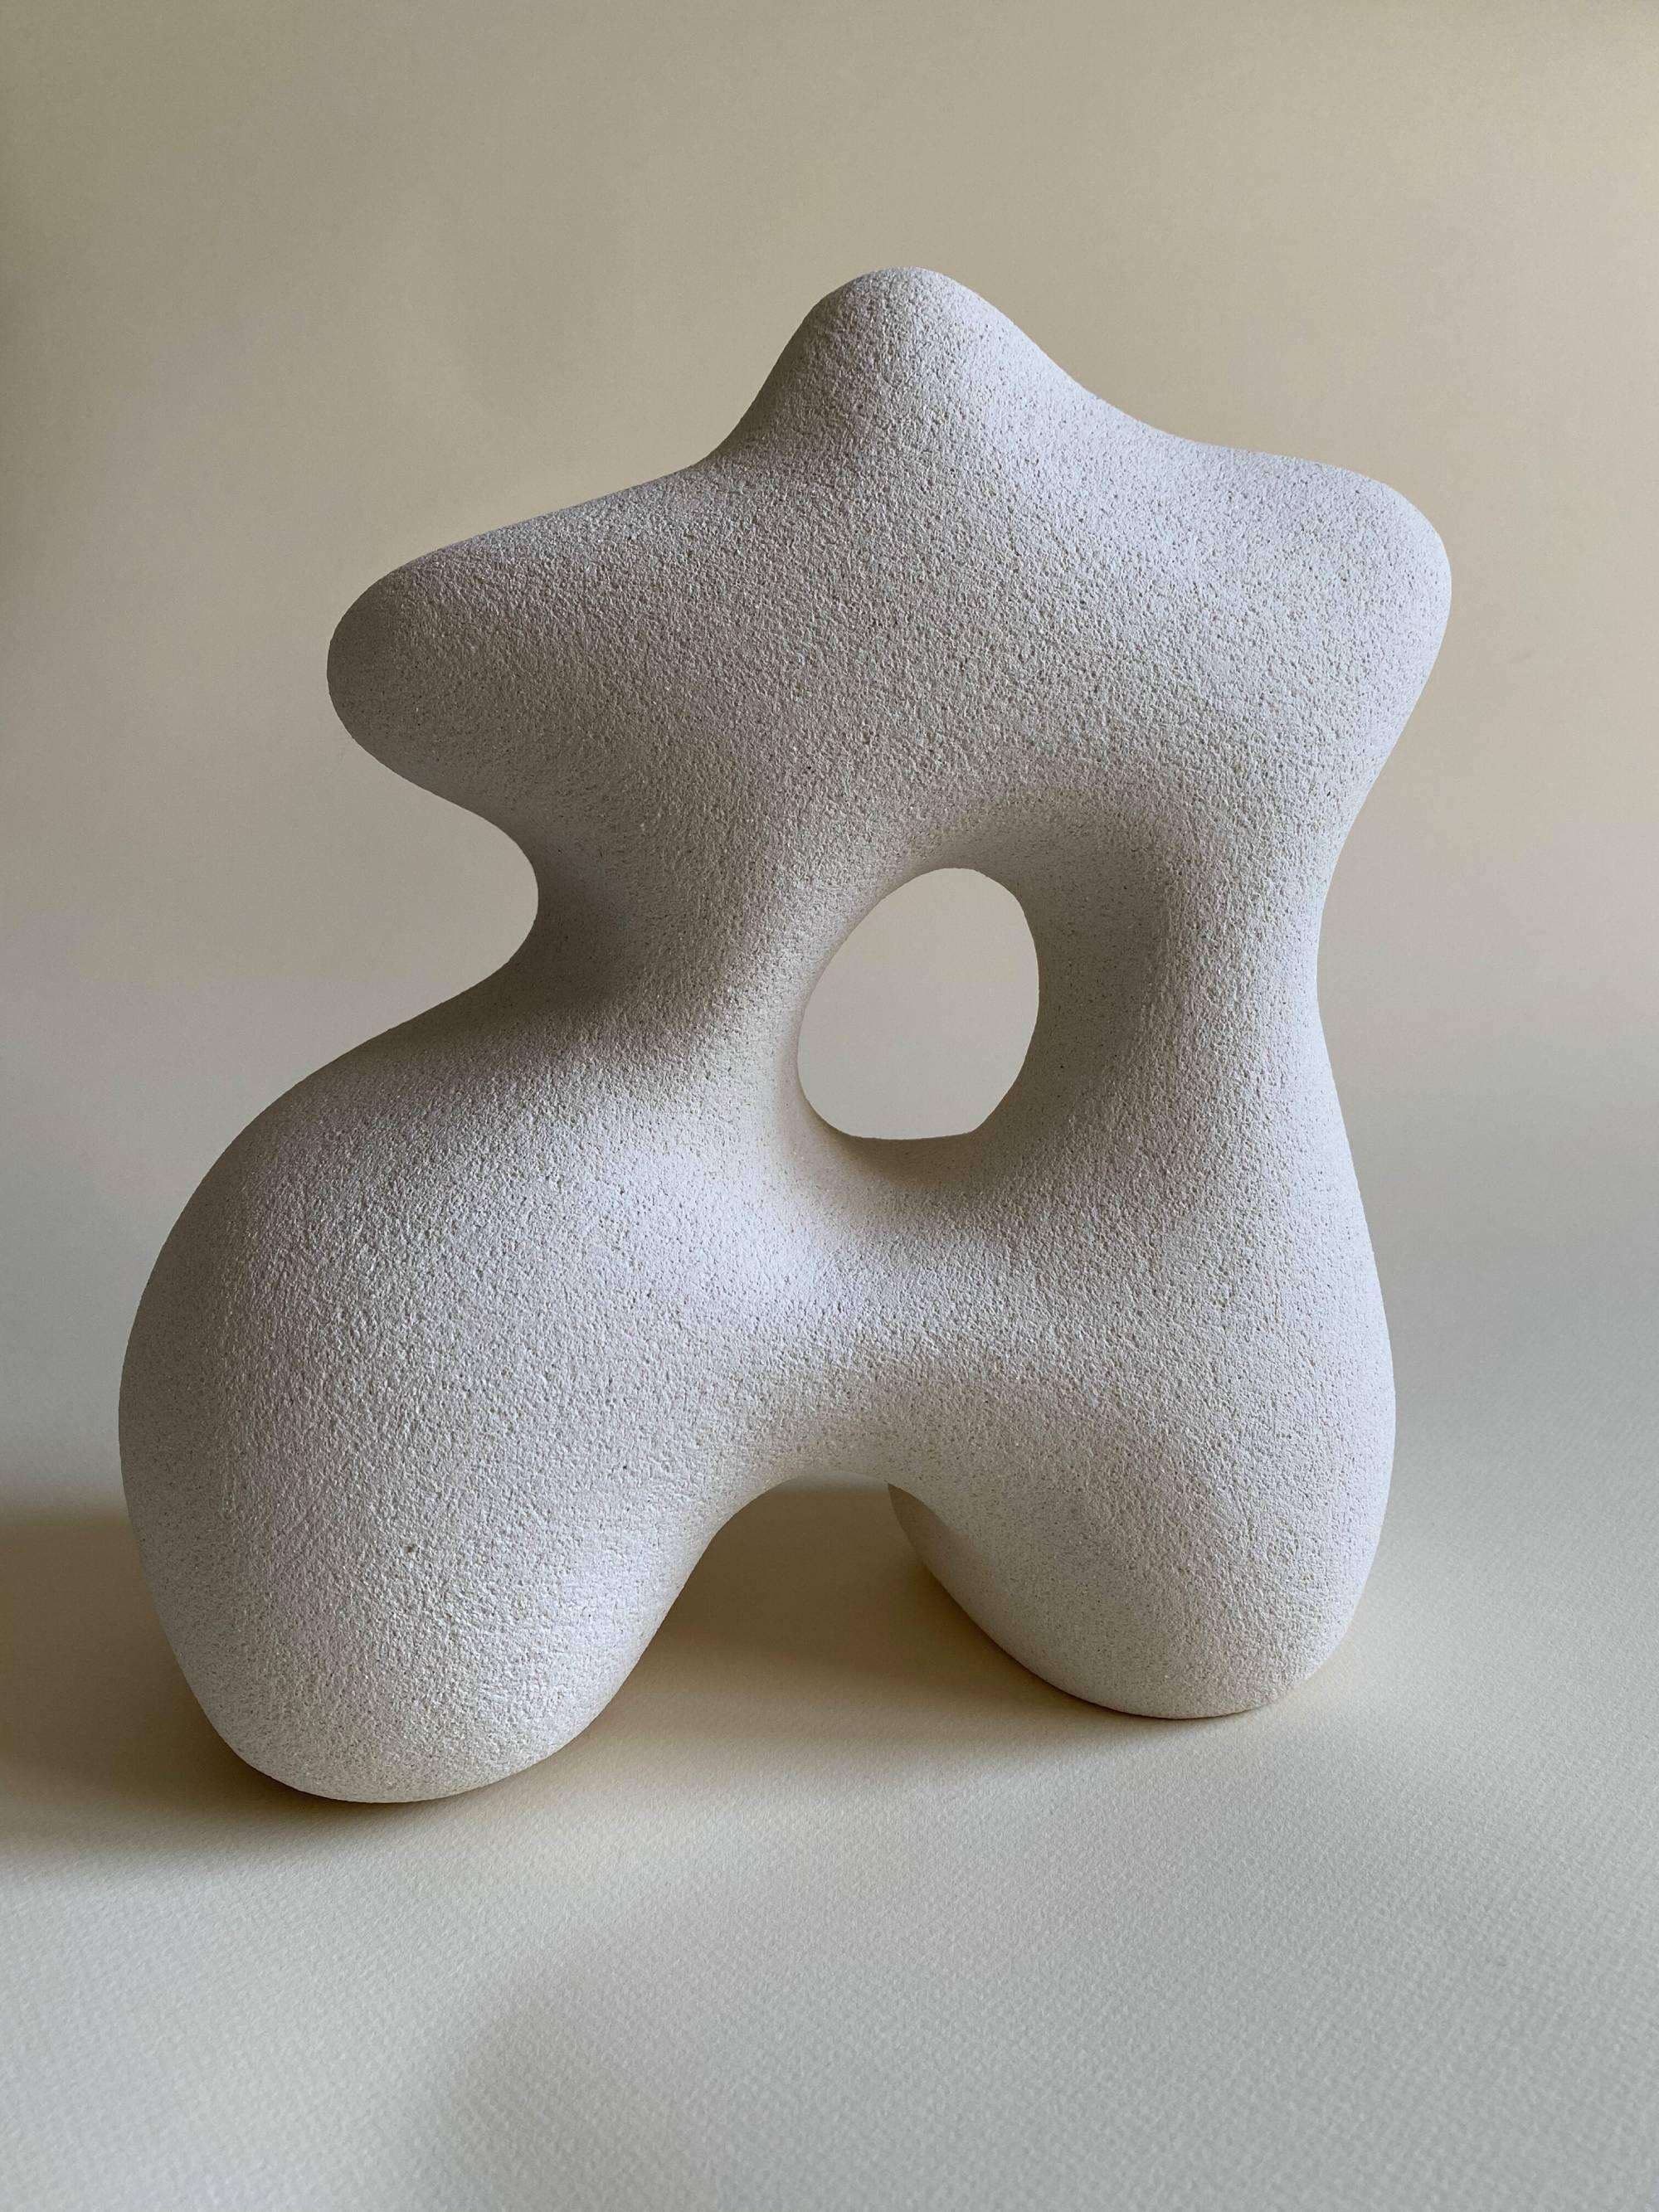 Sandstone Garence hand sculpted by Hermine Bourdin 
Unique
Dimensions: H 25 x W 24 cm
Materials: Sandstone

In my work I’m trying to represent women who are free, who are generous, voluptuous, sensual, strong, thriving and protective.

To me,